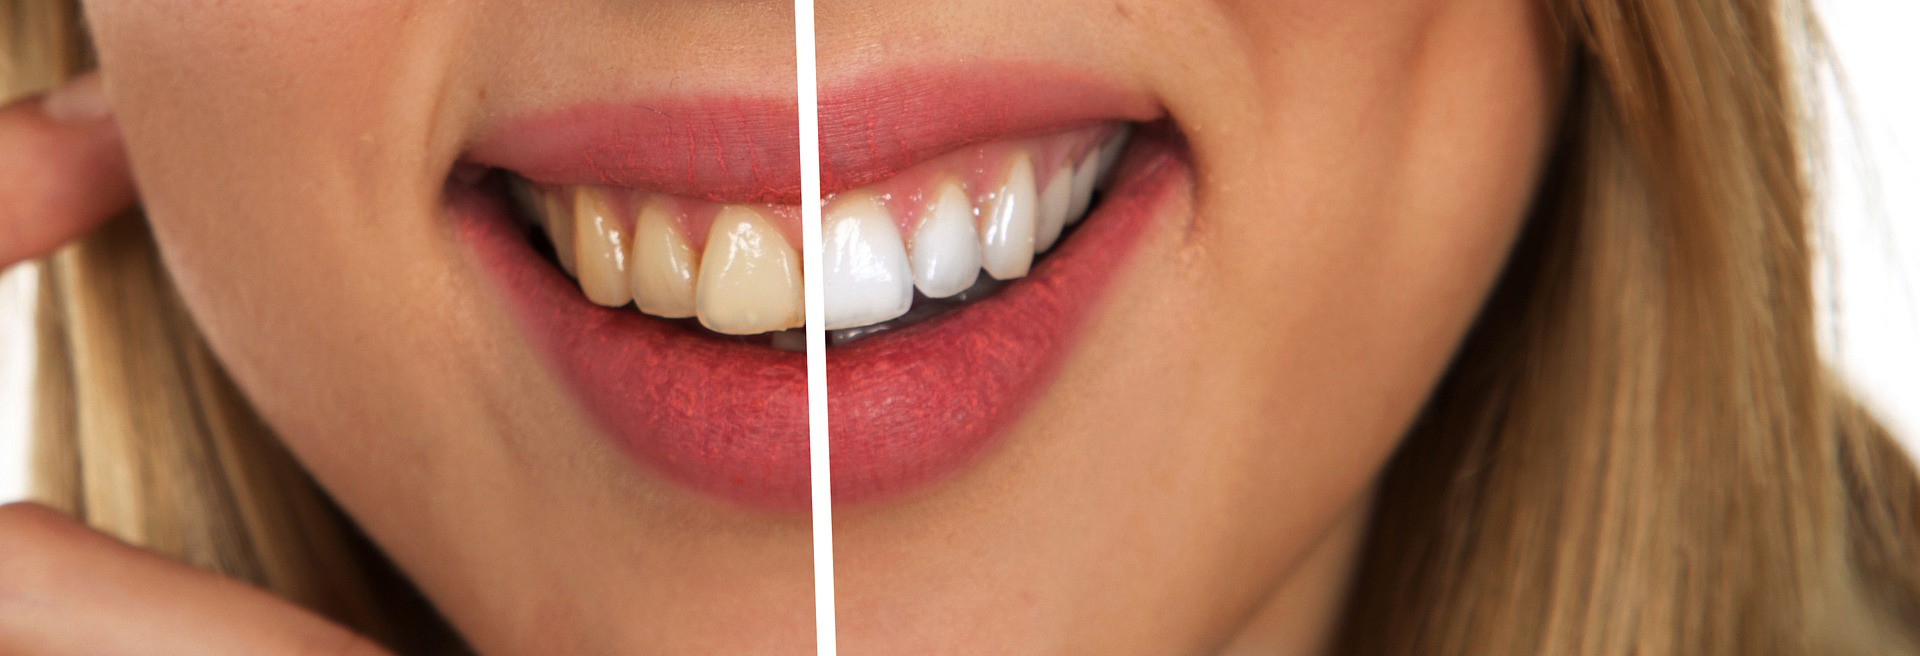 Lady Smiling Before Teeth Whitening and After Teeth Whitening